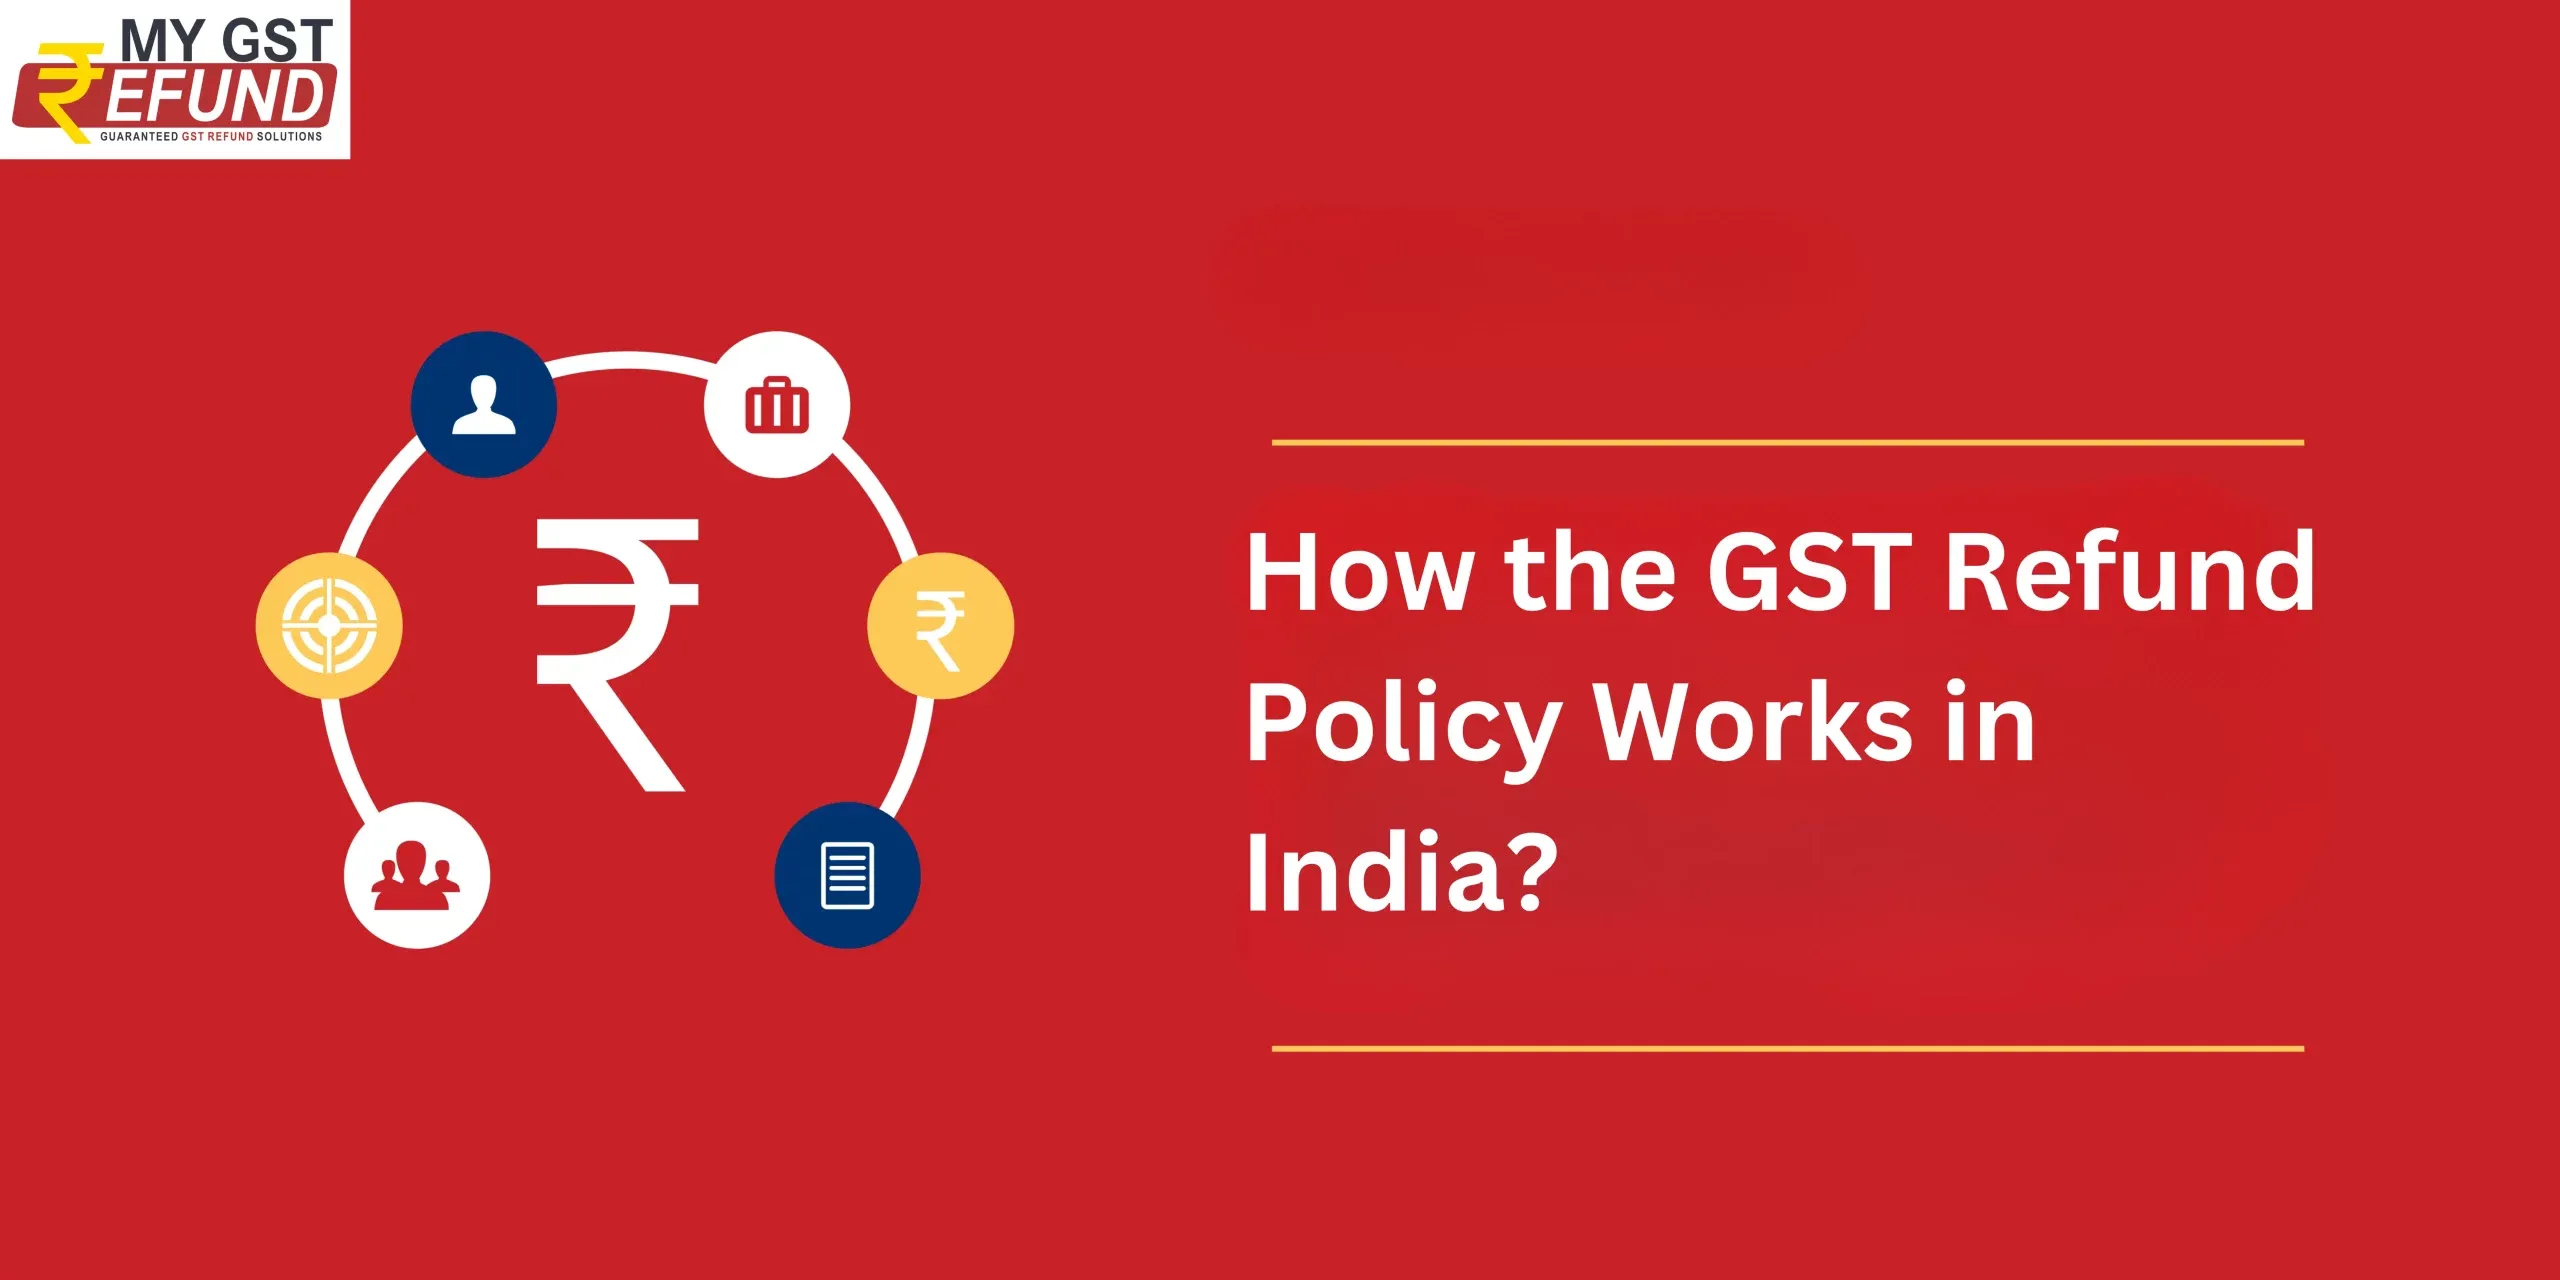 How the GST Refund Policy Works in India?